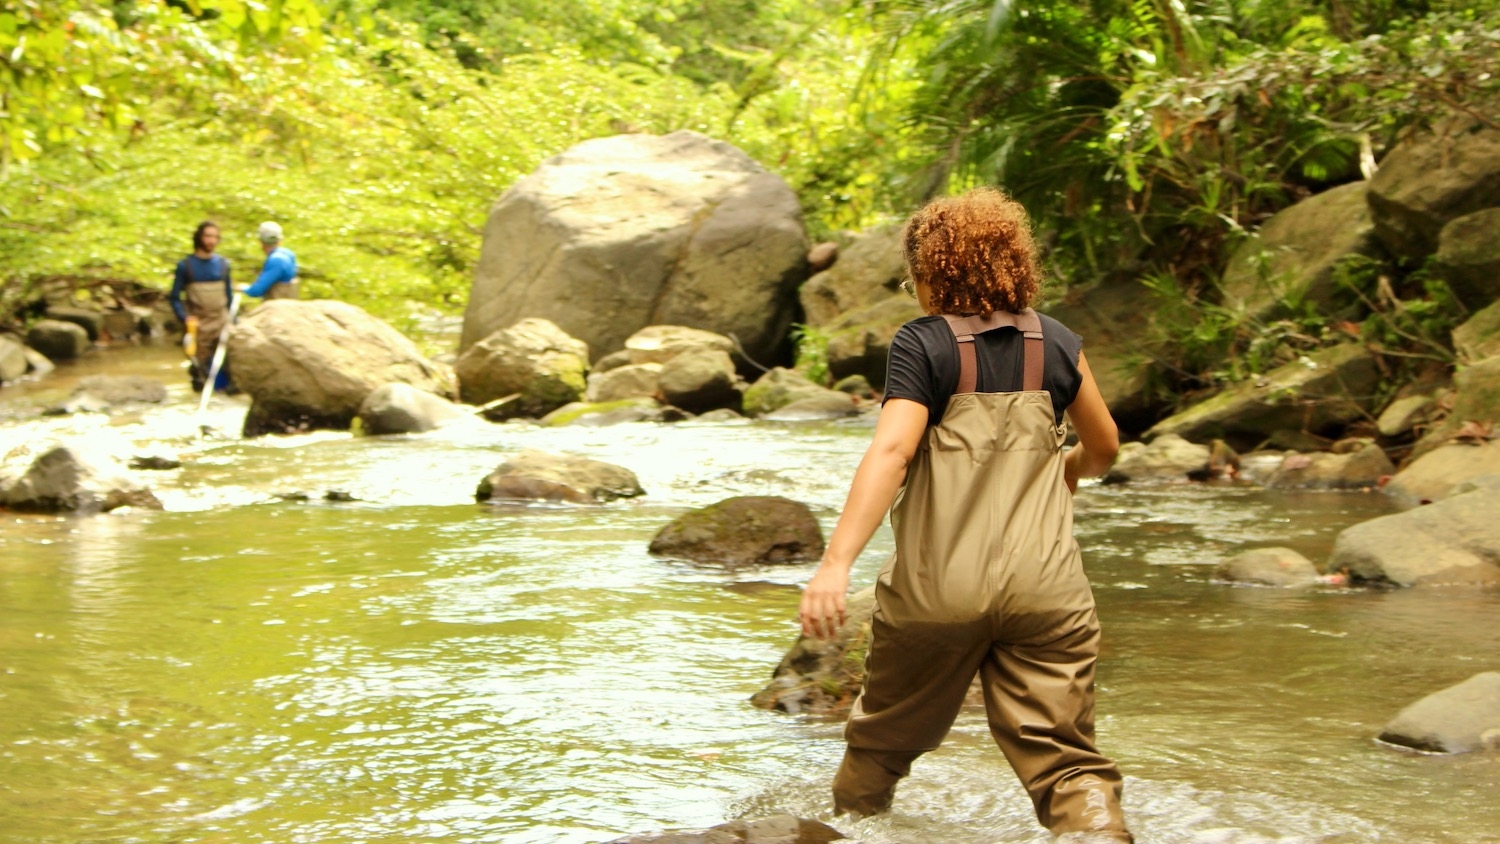 Researchers walking upstream in a river in Puerto Rico.